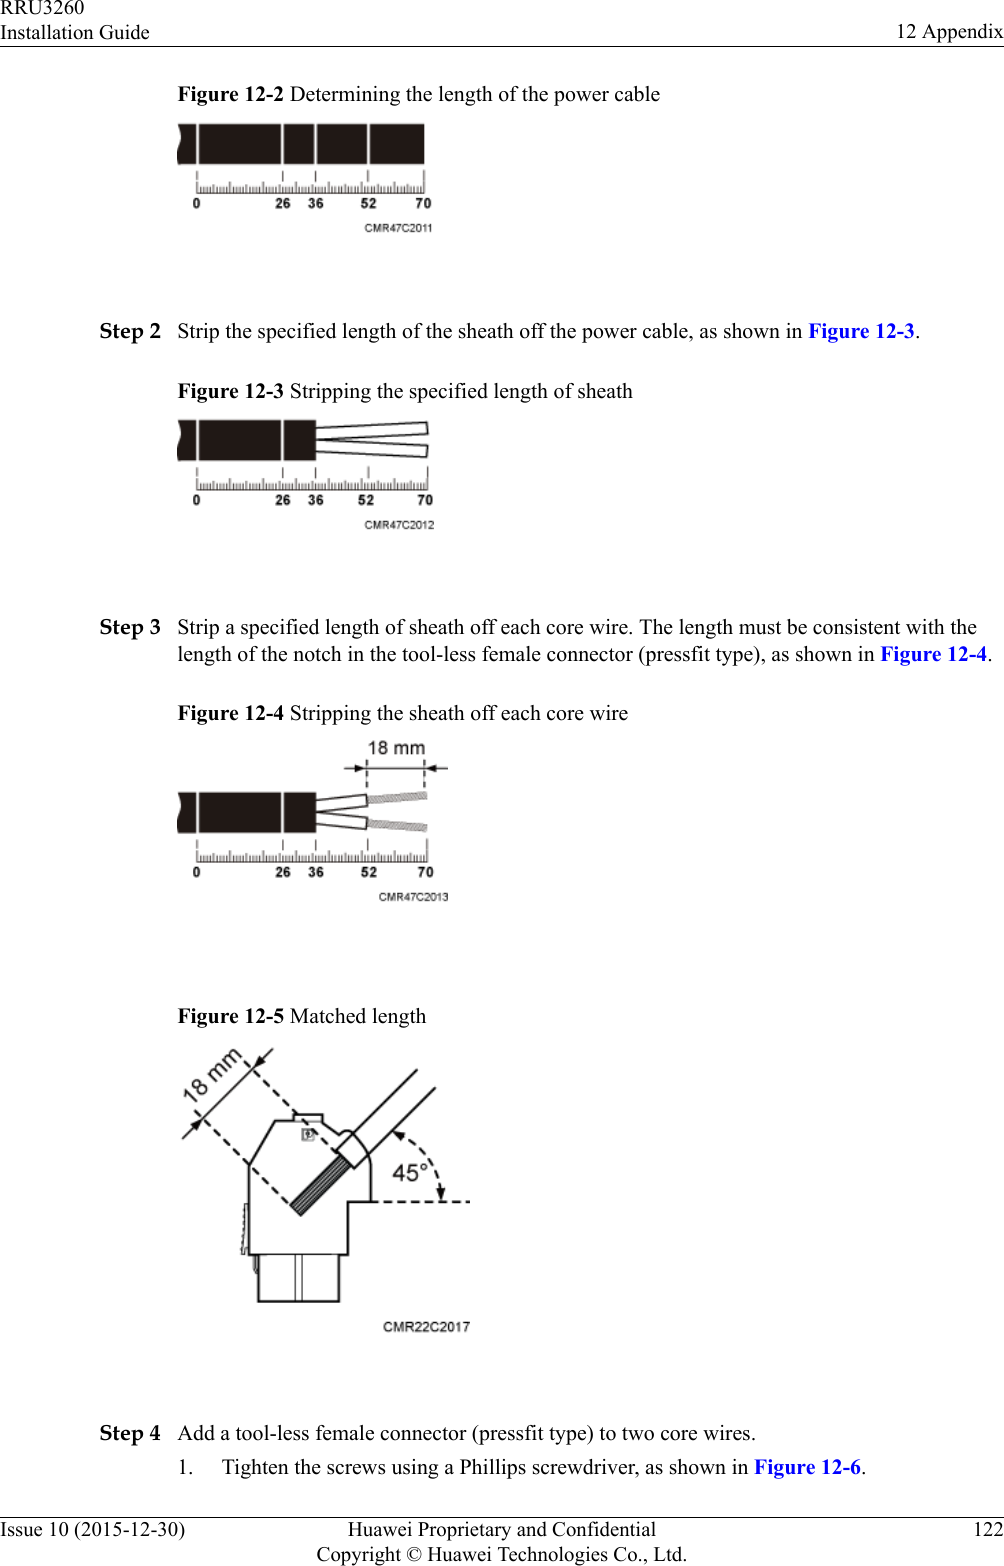 Figure 12-2 Determining the length of the power cable Step 2 Strip the specified length of the sheath off the power cable, as shown in Figure 12-3.Figure 12-3 Stripping the specified length of sheath Step 3 Strip a specified length of sheath off each core wire. The length must be consistent with thelength of the notch in the tool-less female connector (pressfit type), as shown in Figure 12-4.Figure 12-4 Stripping the sheath off each core wire Figure 12-5 Matched length Step 4 Add a tool-less female connector (pressfit type) to two core wires.1. Tighten the screws using a Phillips screwdriver, as shown in Figure 12-6.RRU3260Installation Guide 12 AppendixIssue 10 (2015-12-30) Huawei Proprietary and ConfidentialCopyright © Huawei Technologies Co., Ltd.122